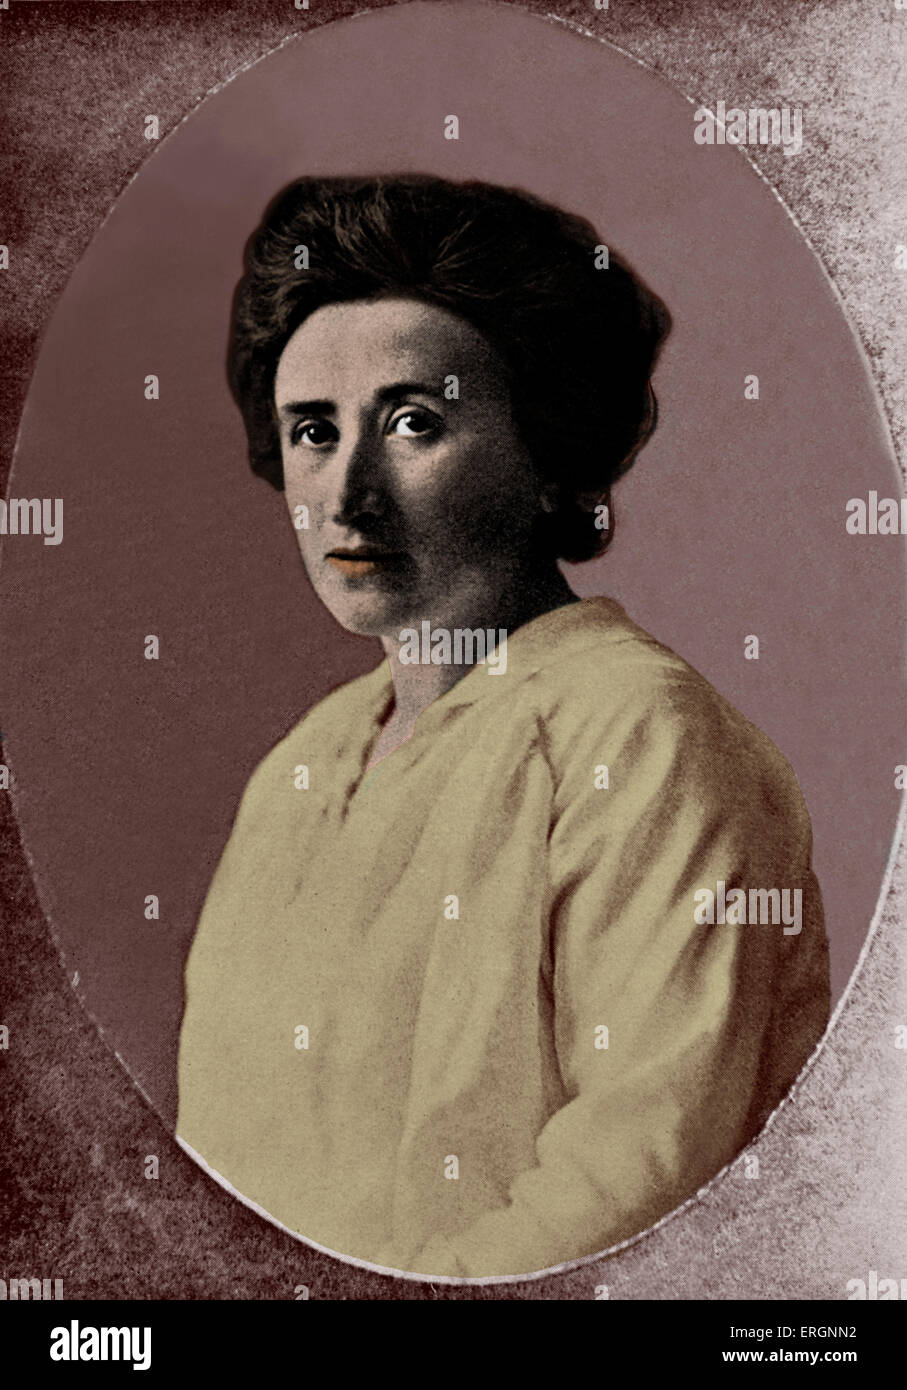 Rosa Luxemburg - portrait of the German political theorist 5 March 1870 or 1871- 15 January 1919. Stock Photo